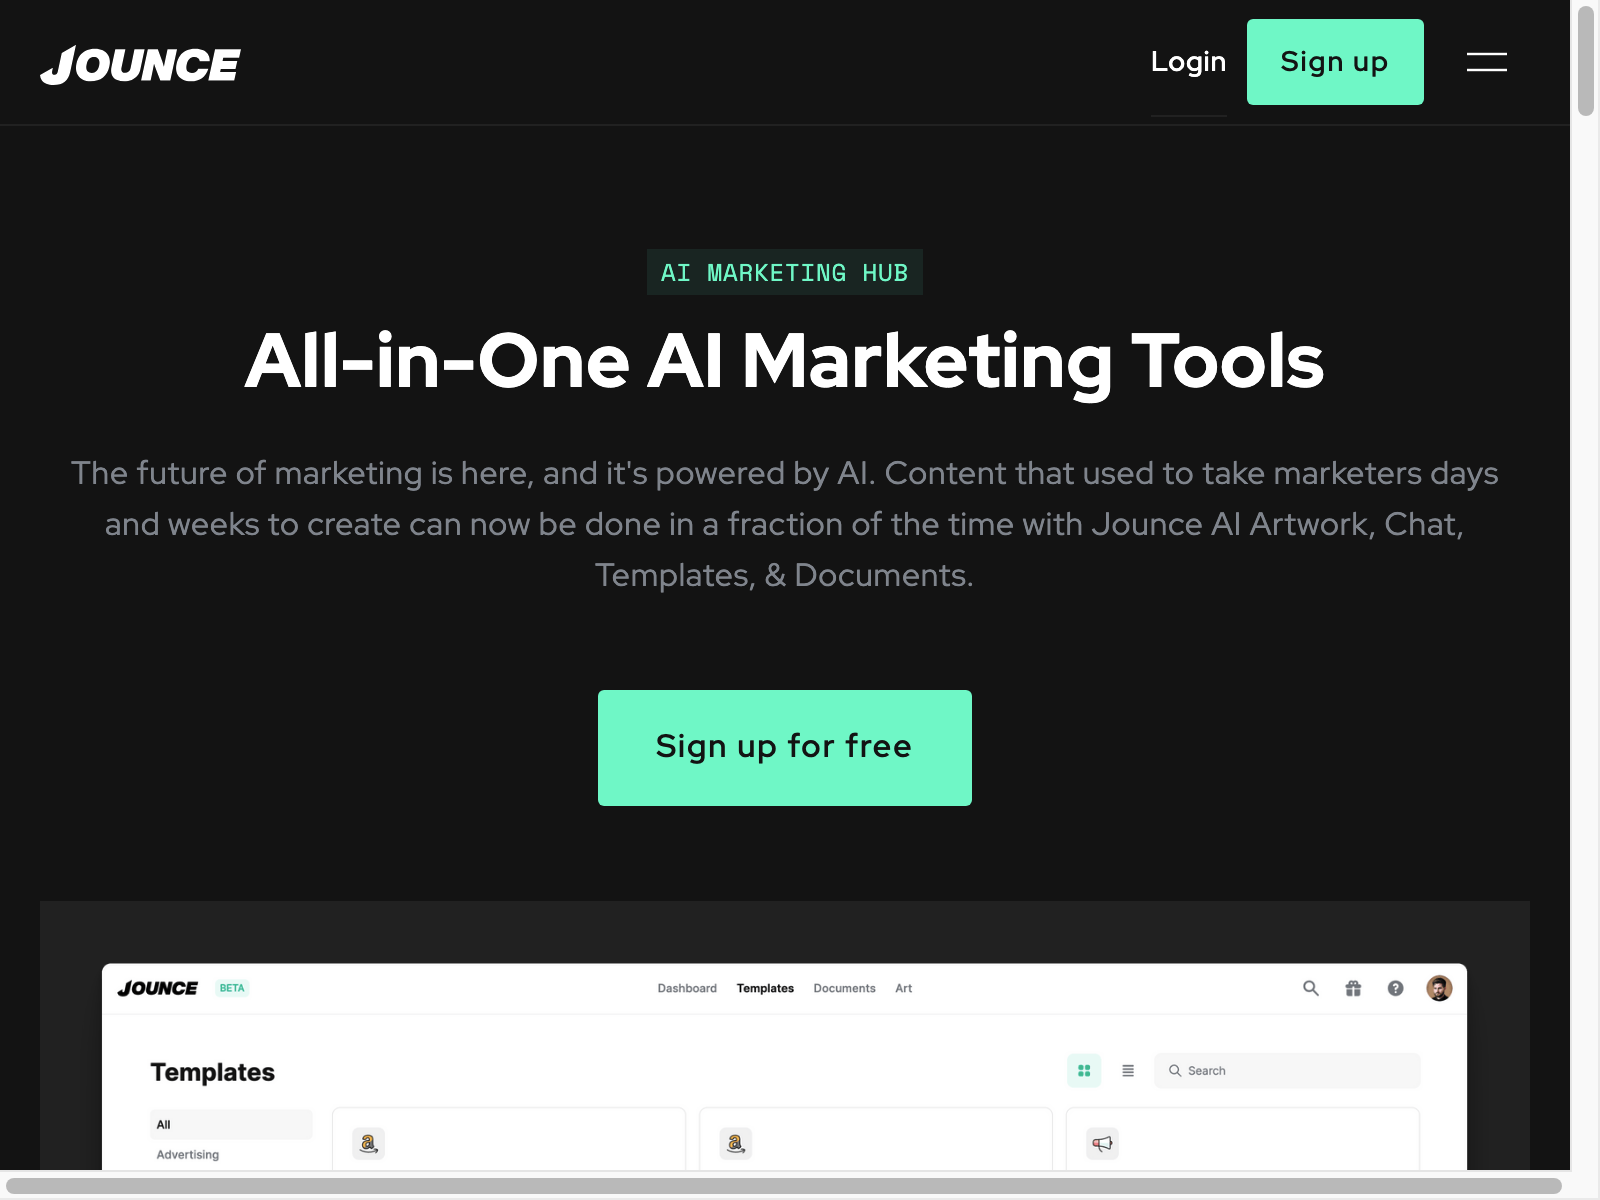 jounce Review: Pros, Cons, Alternatives